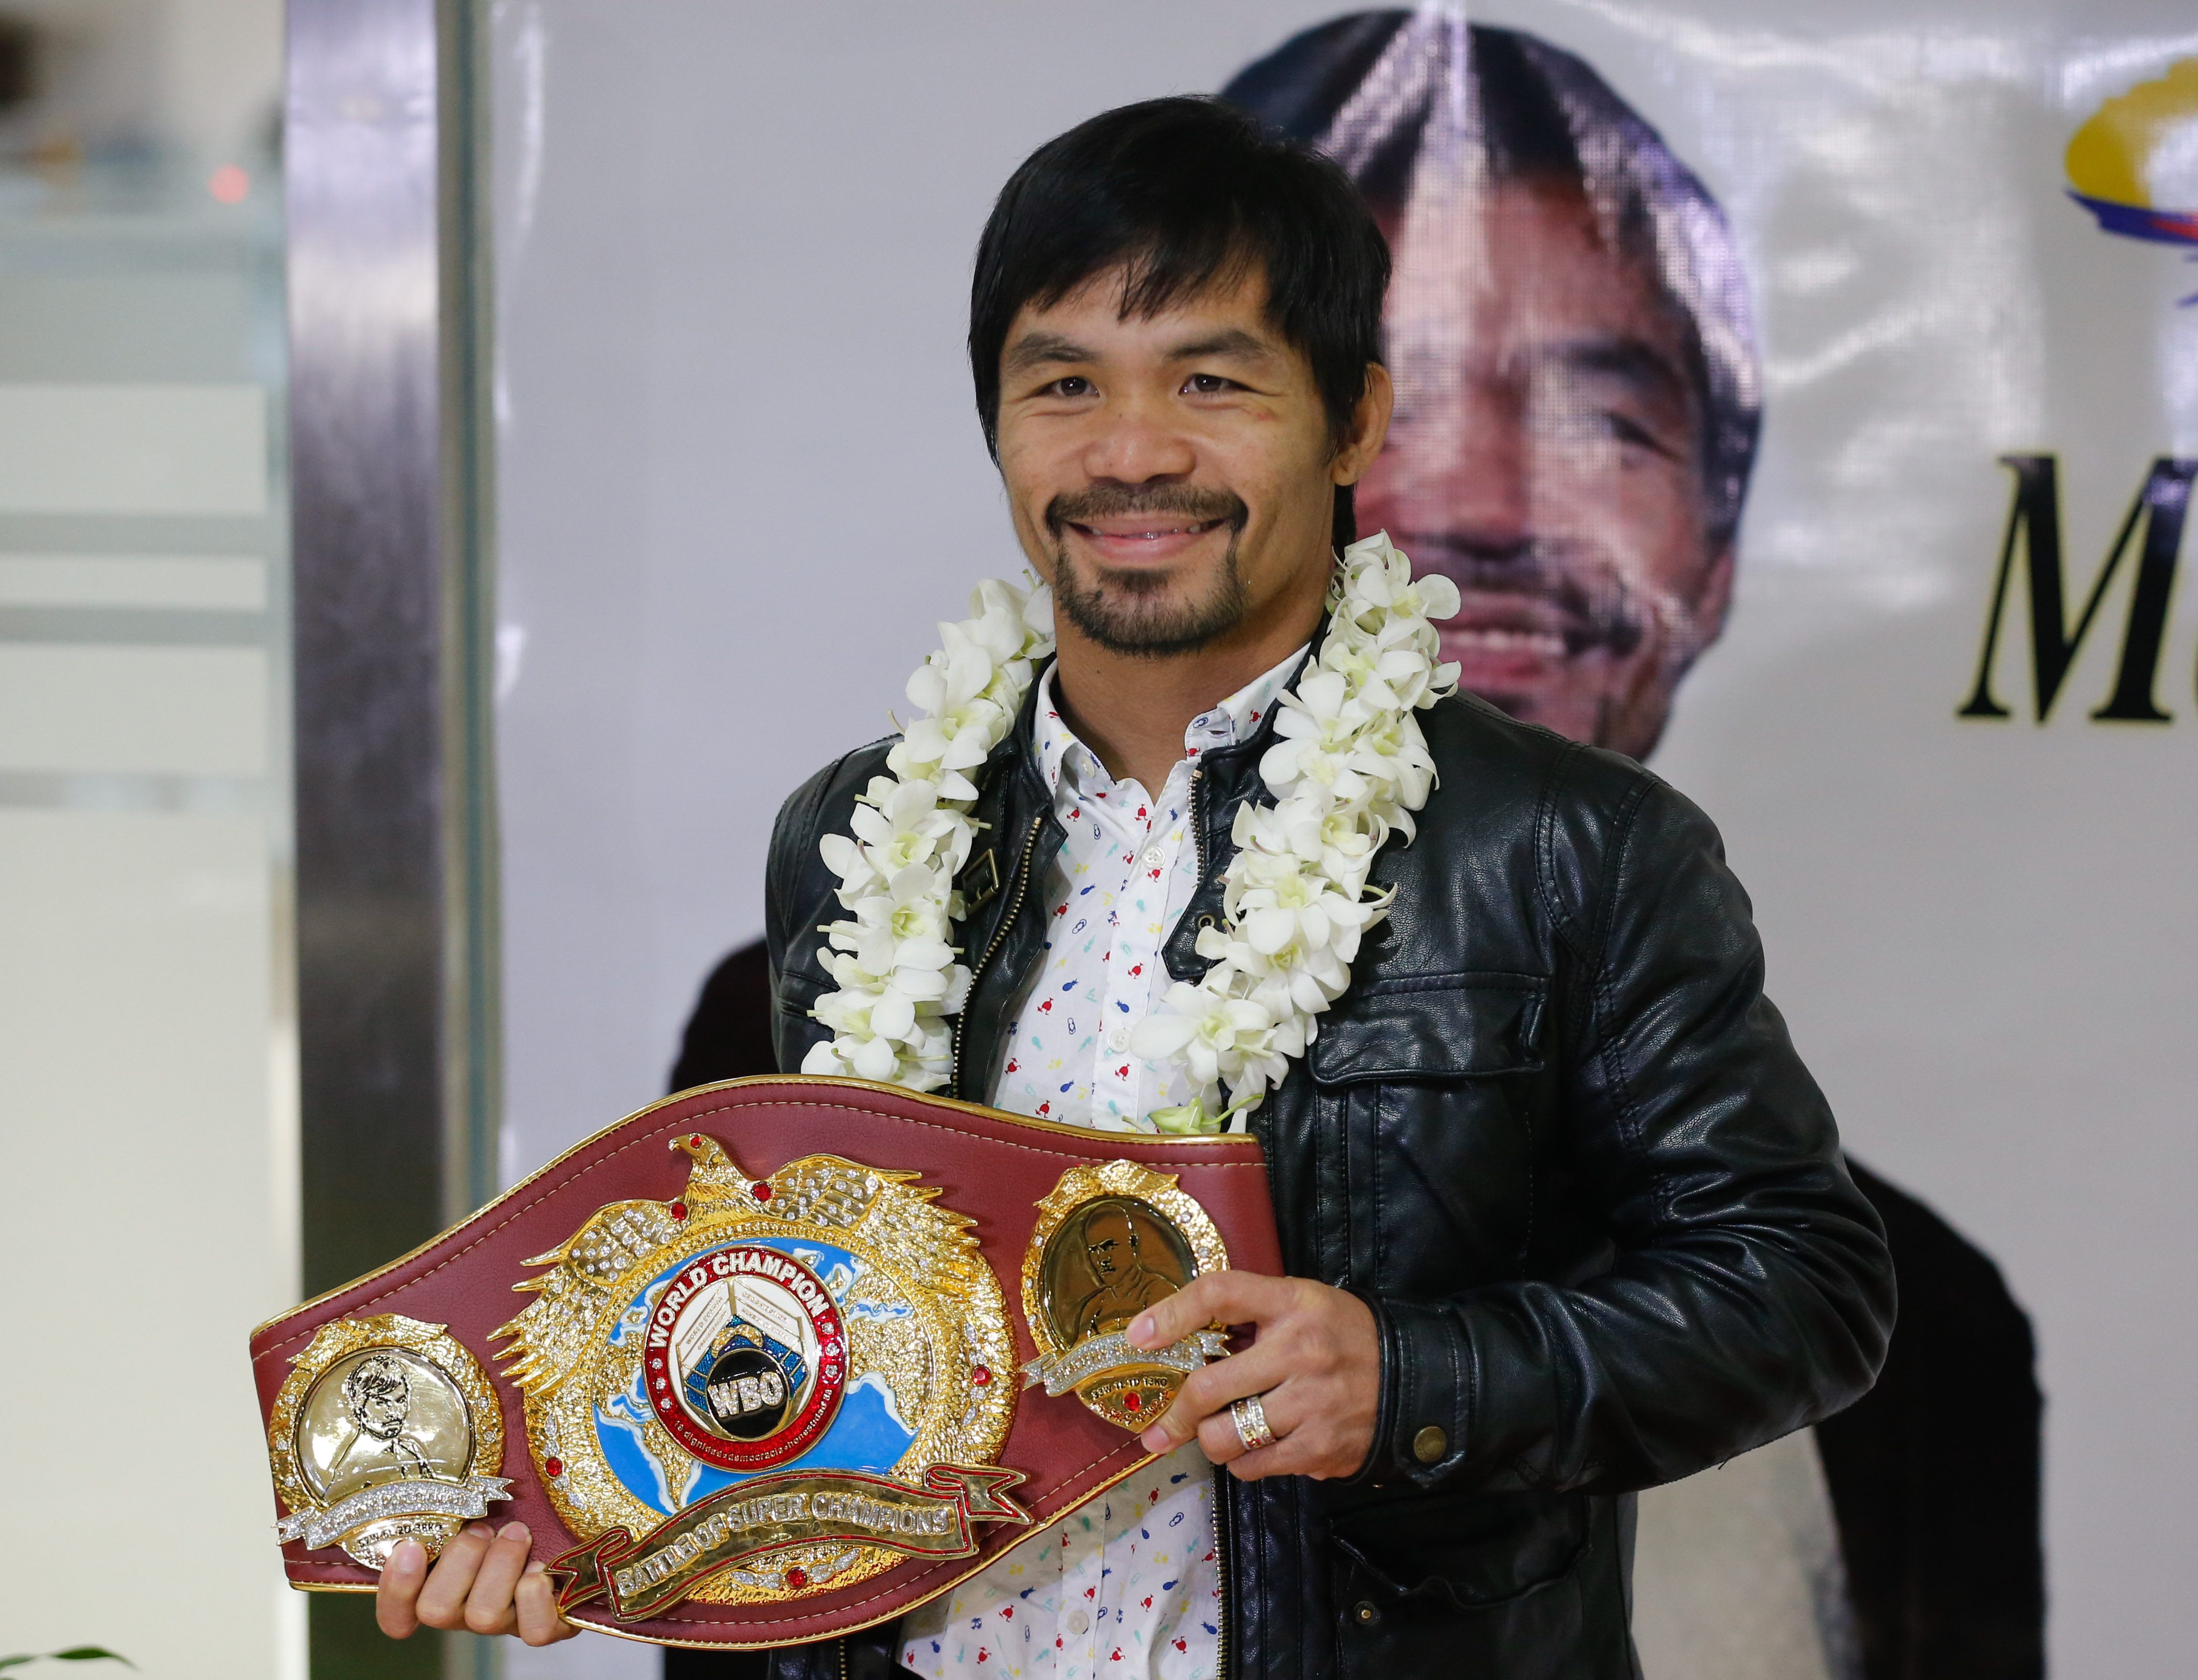 Filipino boxing icon Manny 'Pacman' Pacquiao holding his World Boxing Organization WBO International Welterweight Championship title poses for pictures upon his arrival at the Ninoy Aquino International Airport in Manila, Philippines, 14 April 2016. Philippine boxer Manny Pacquiao arrived in Manila after his unanimous win over US boxer Timothy Bradley in Las Vegas, USA in their World Boxing Organization WBO International Welterweight Championship title bout. Pacquiao declared his retirement from boxing following his match to focus on his family and political career. Pacquiao is running for Senator in the upcoming Philippine elections on 09 May. EPA/MARK R. CRISTINO 